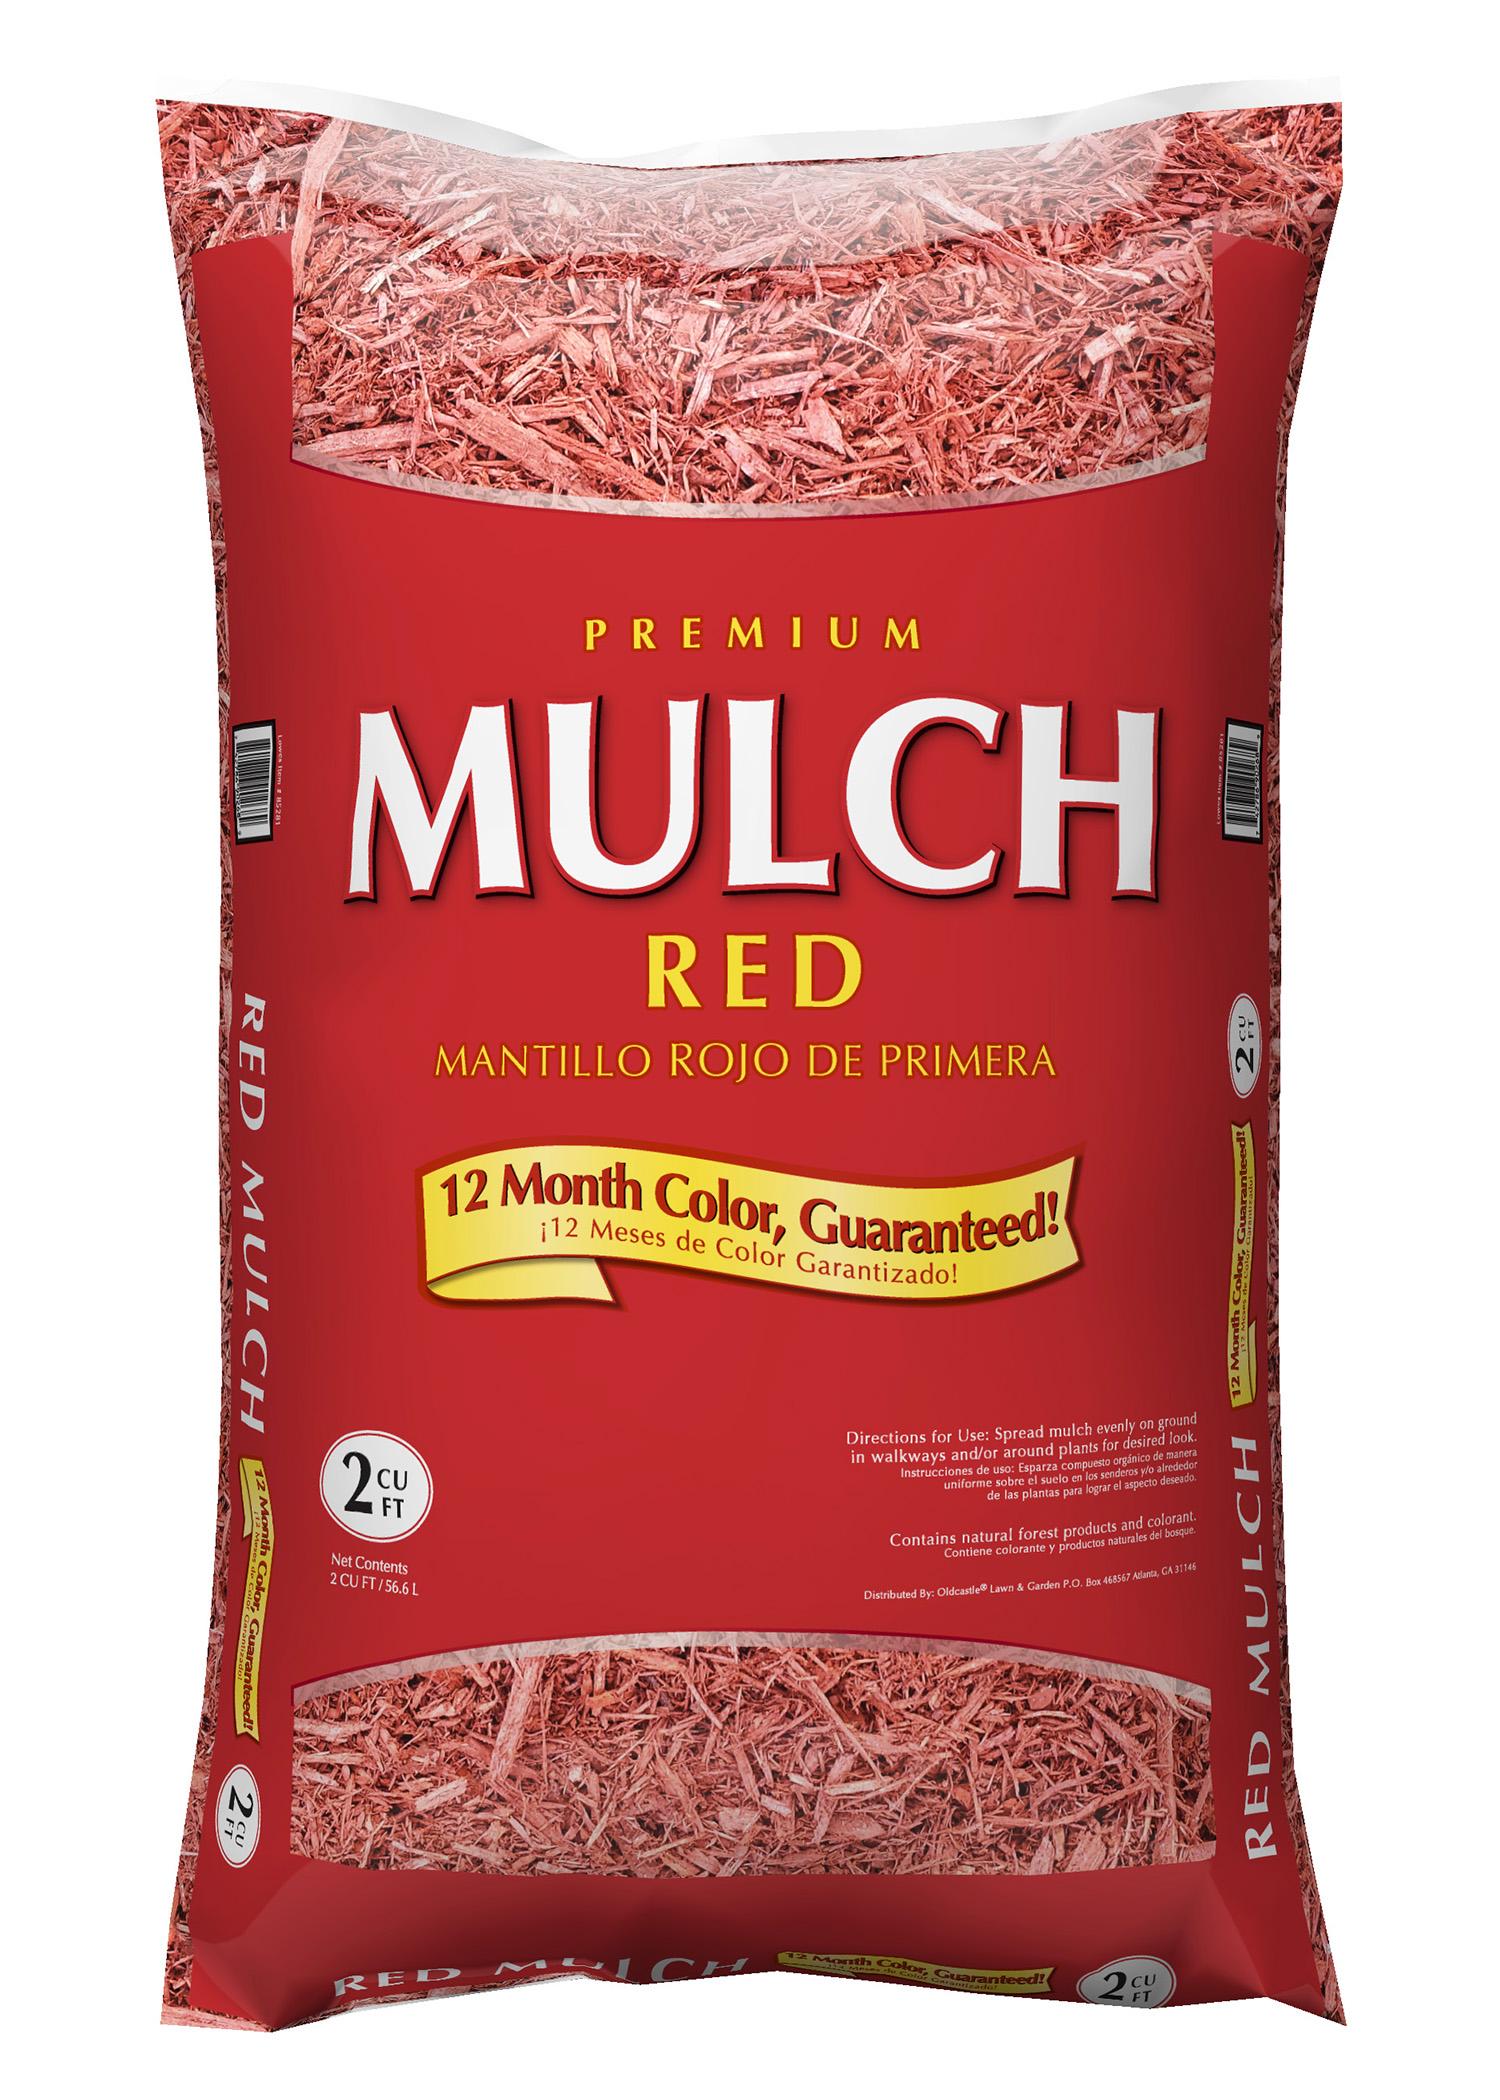 Red Mulch at